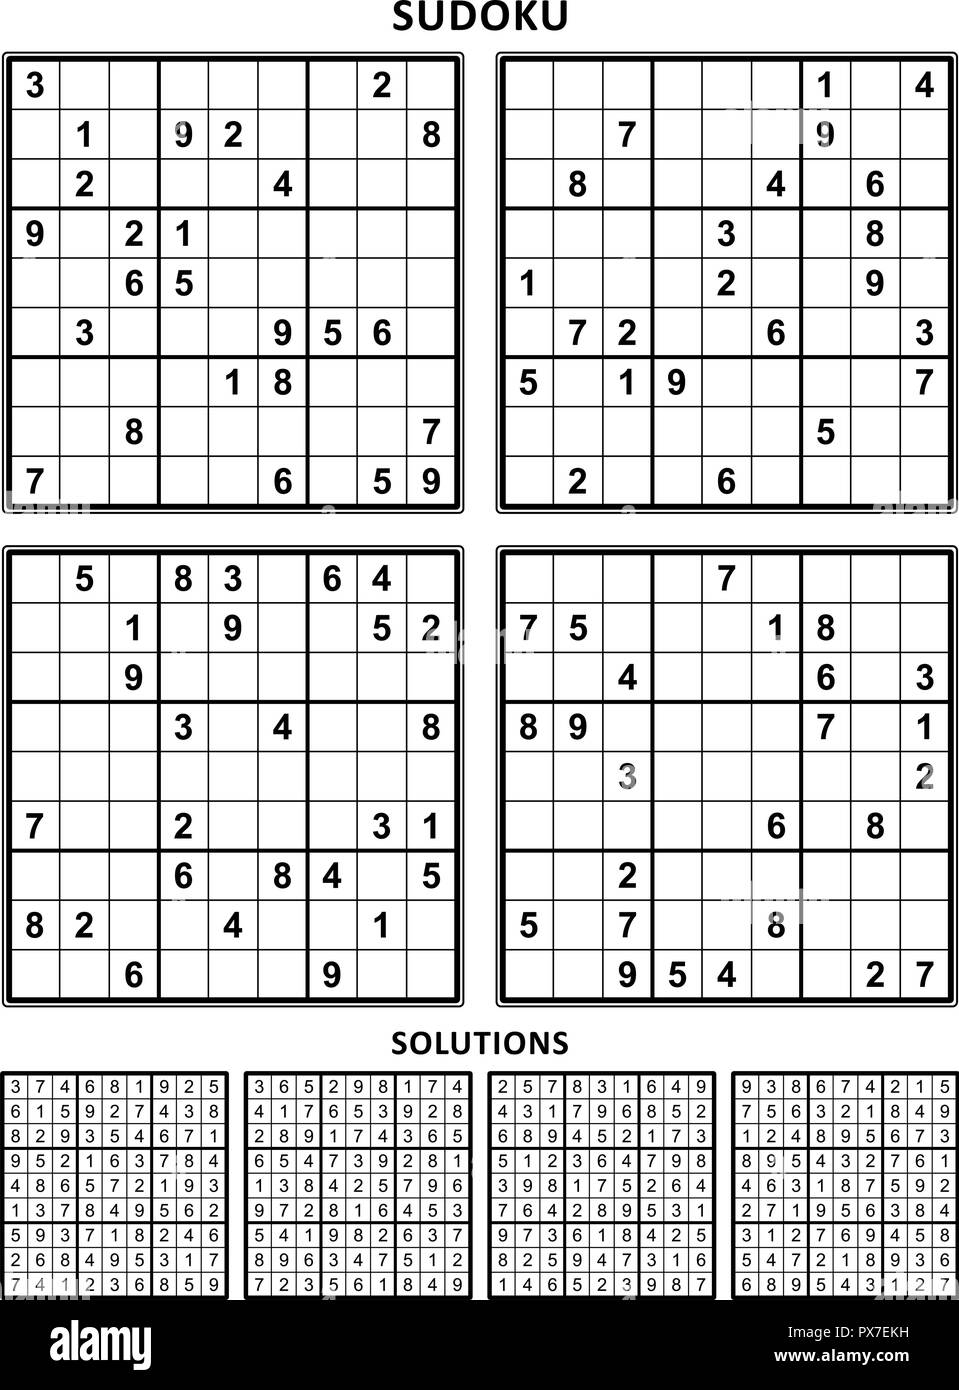 Four Sudoku Puzzles Of Comfortable easy Yet Not Very Easy Level Suitable For Large Print 